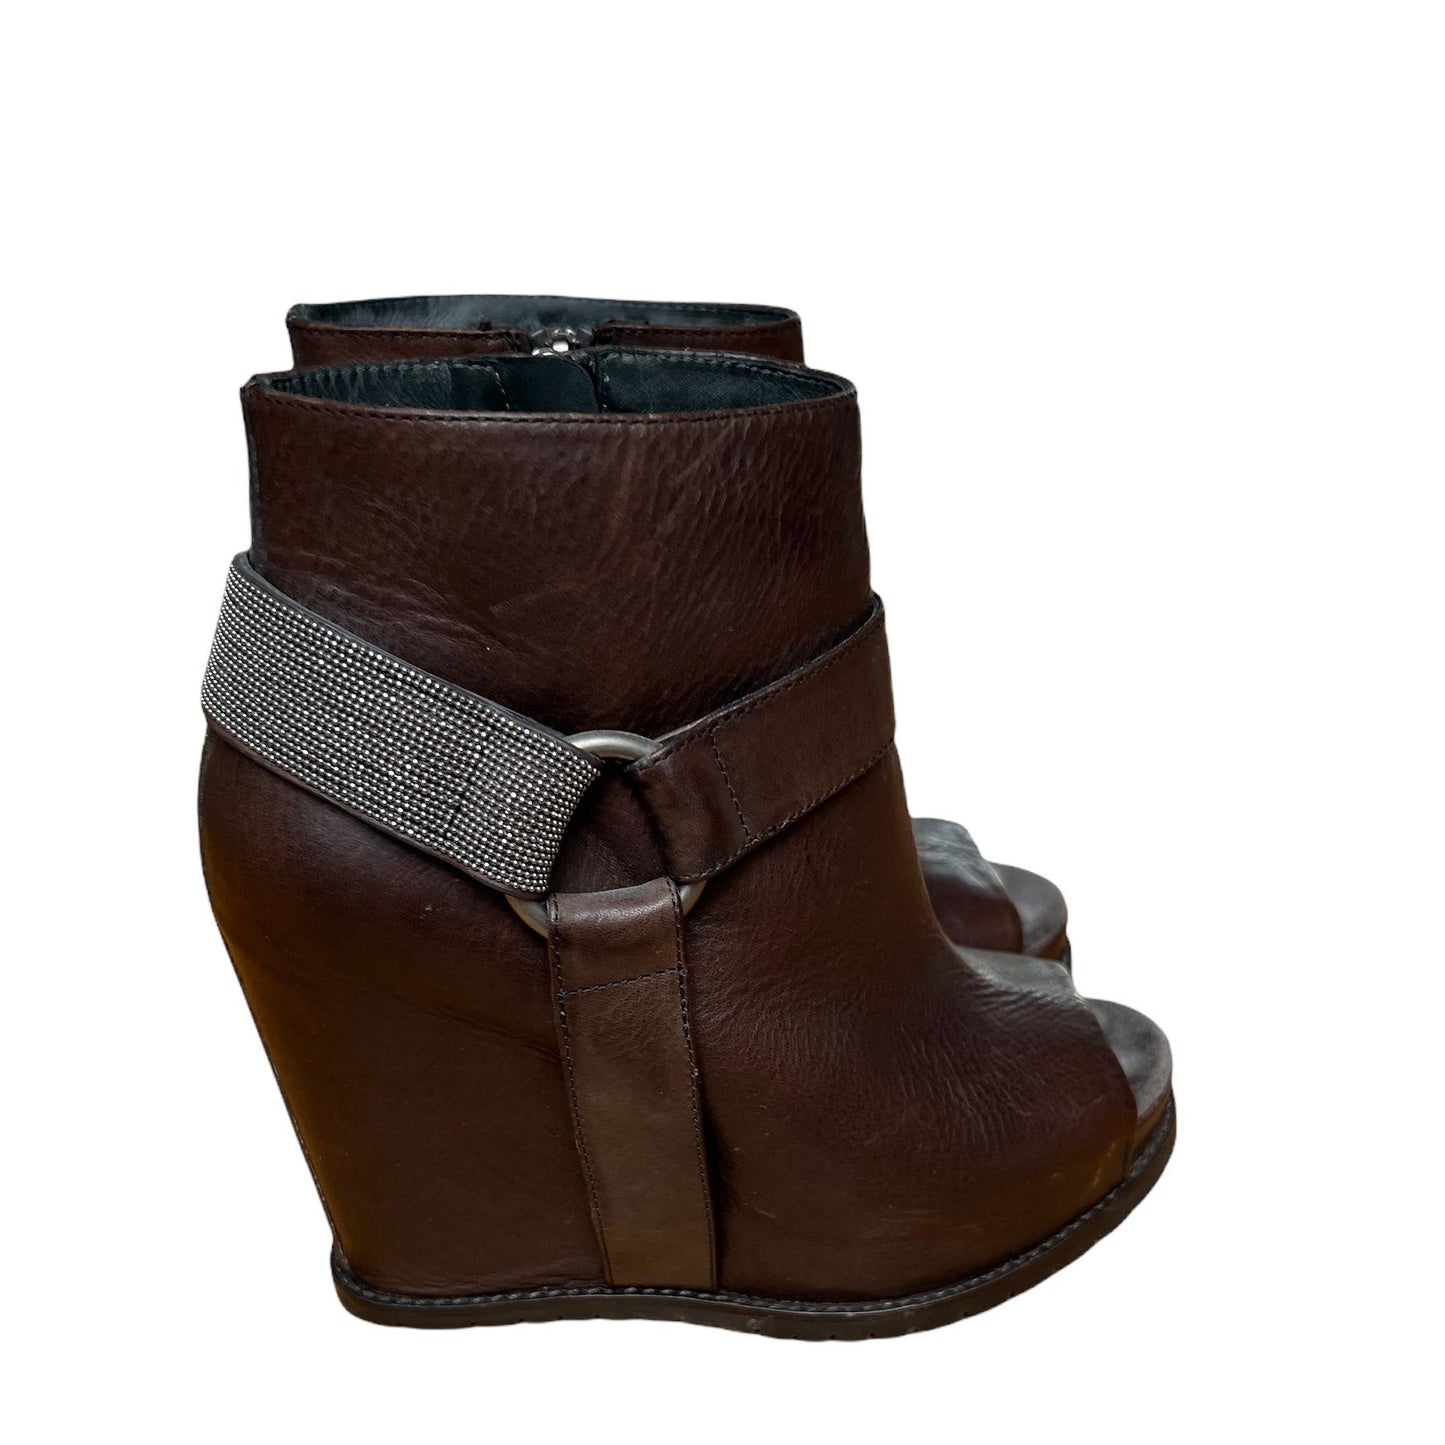 Brown Leather Low Boots - 6